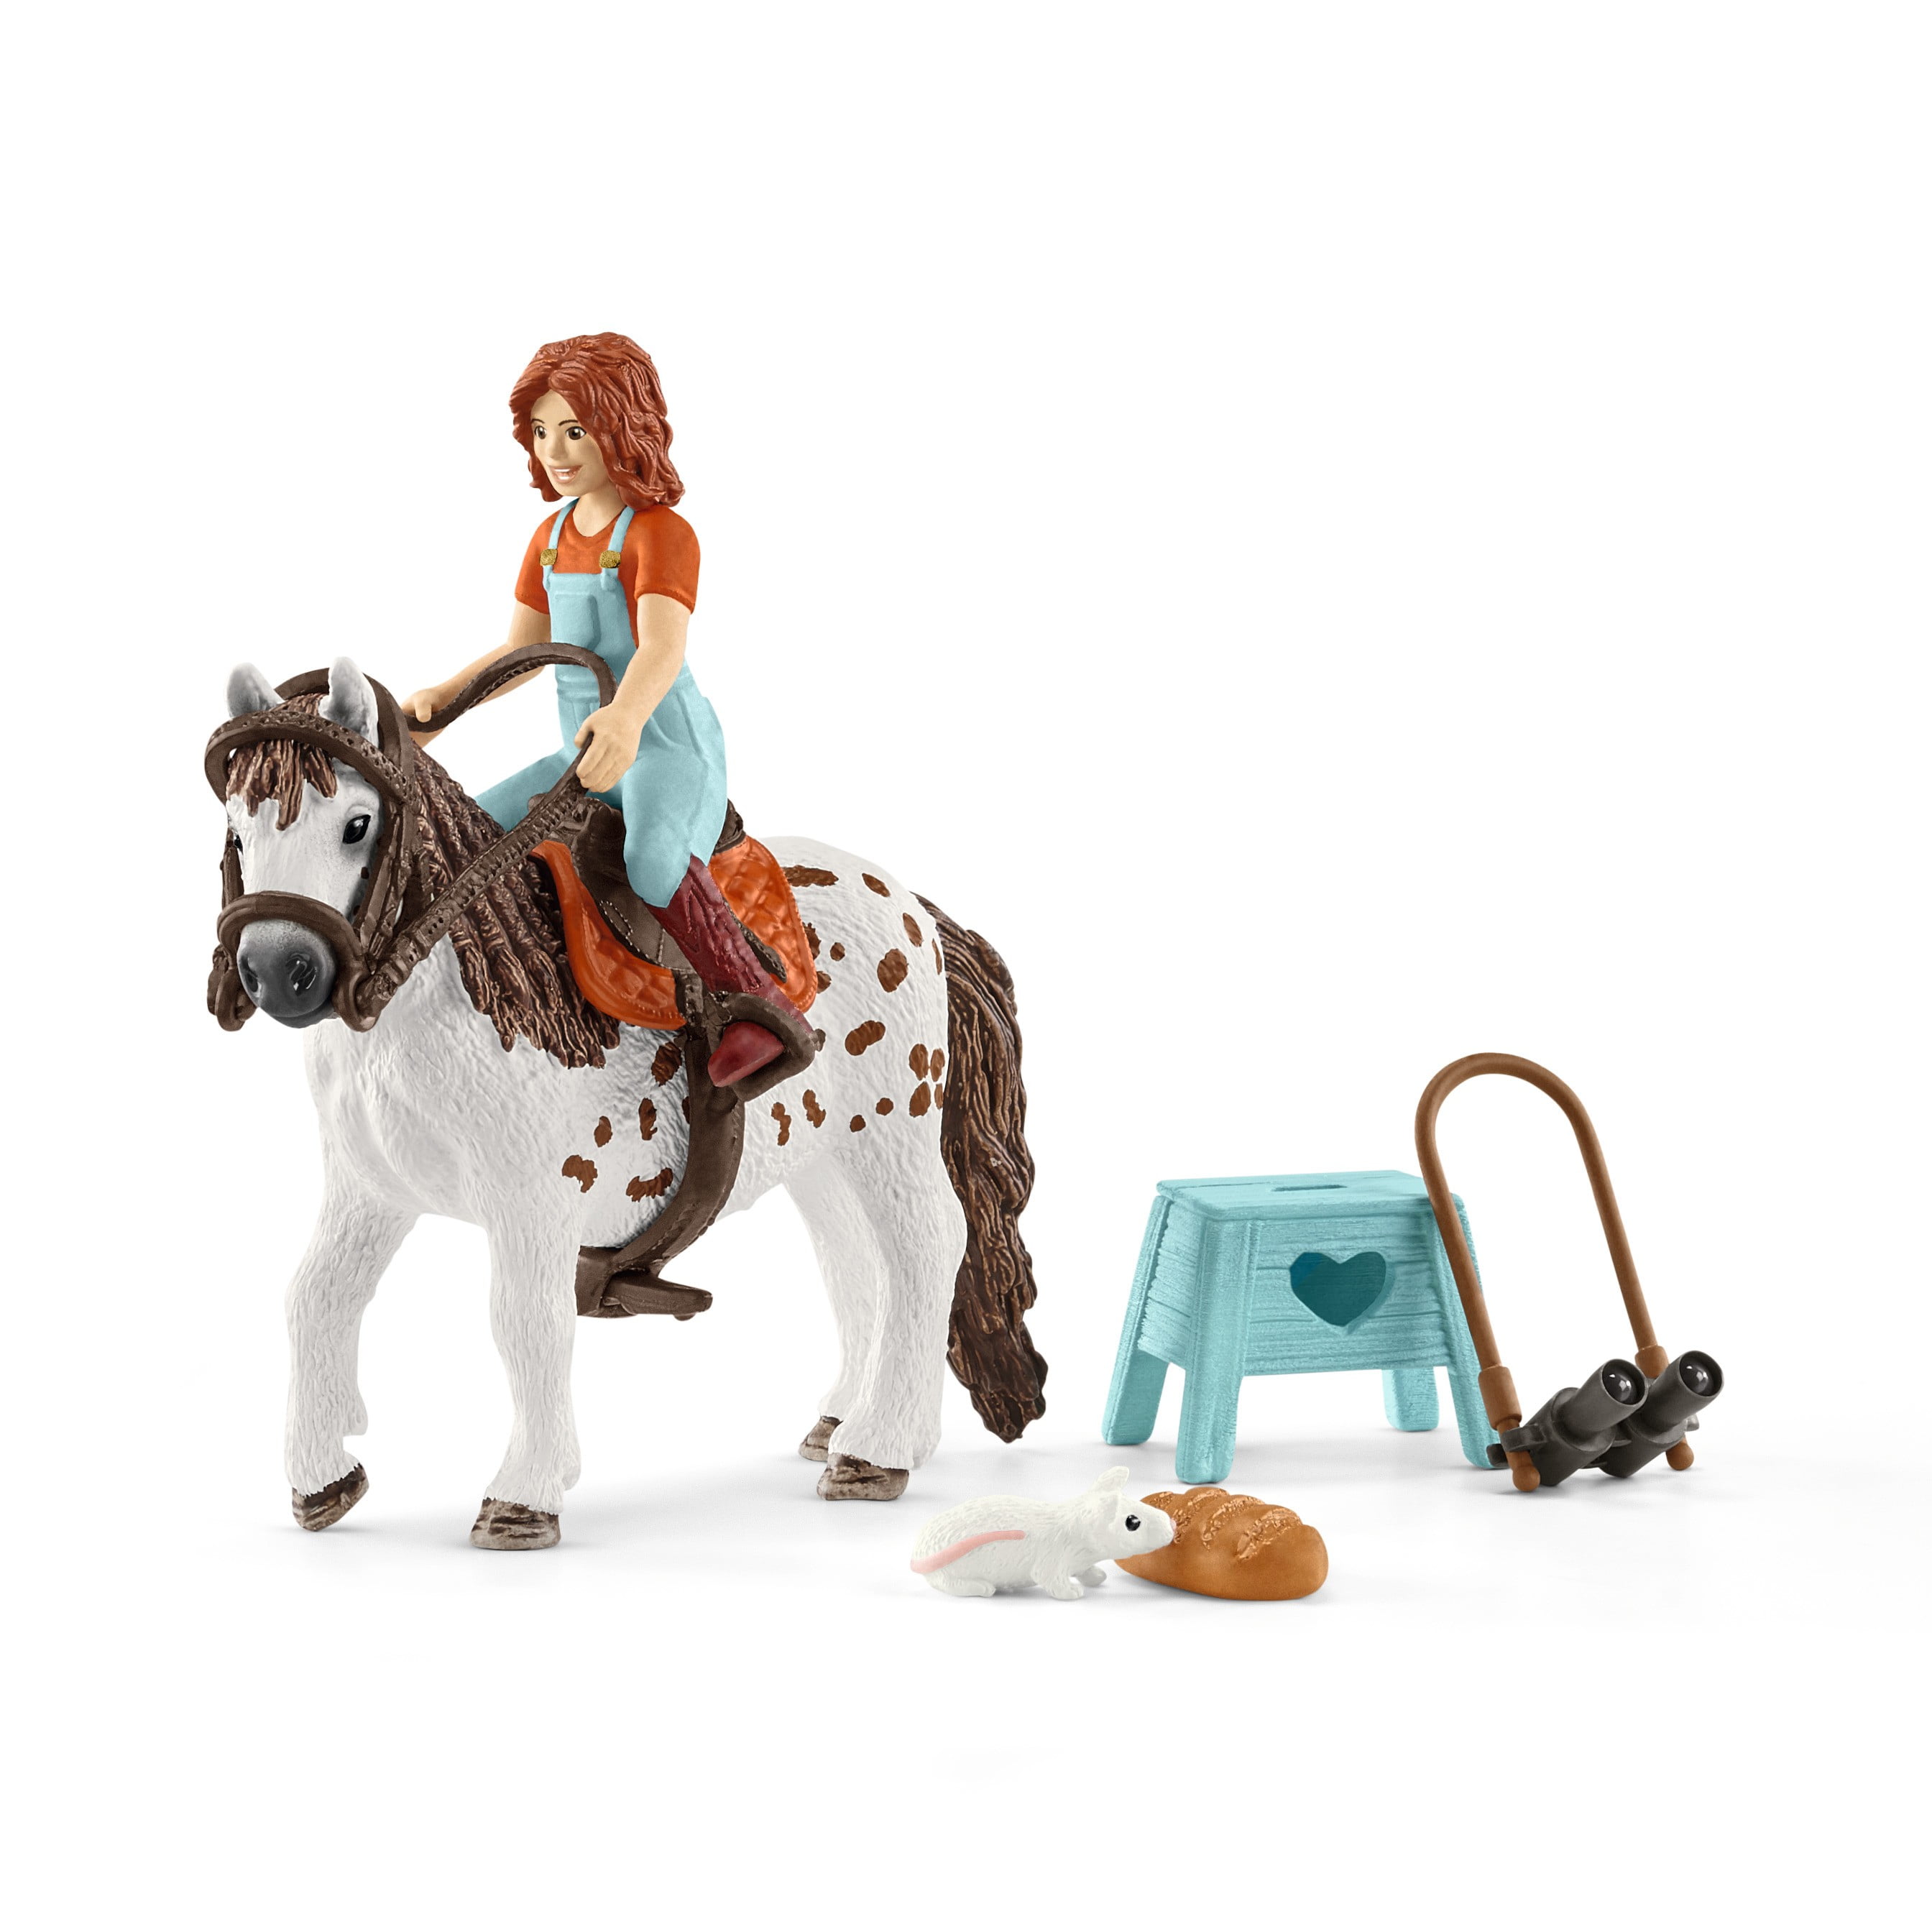 TOY BRIDLE HORSE PLAYING DAILY CHILDREN FUN AGE 3 NEW SCHLEICH WESTERN SADDLE 